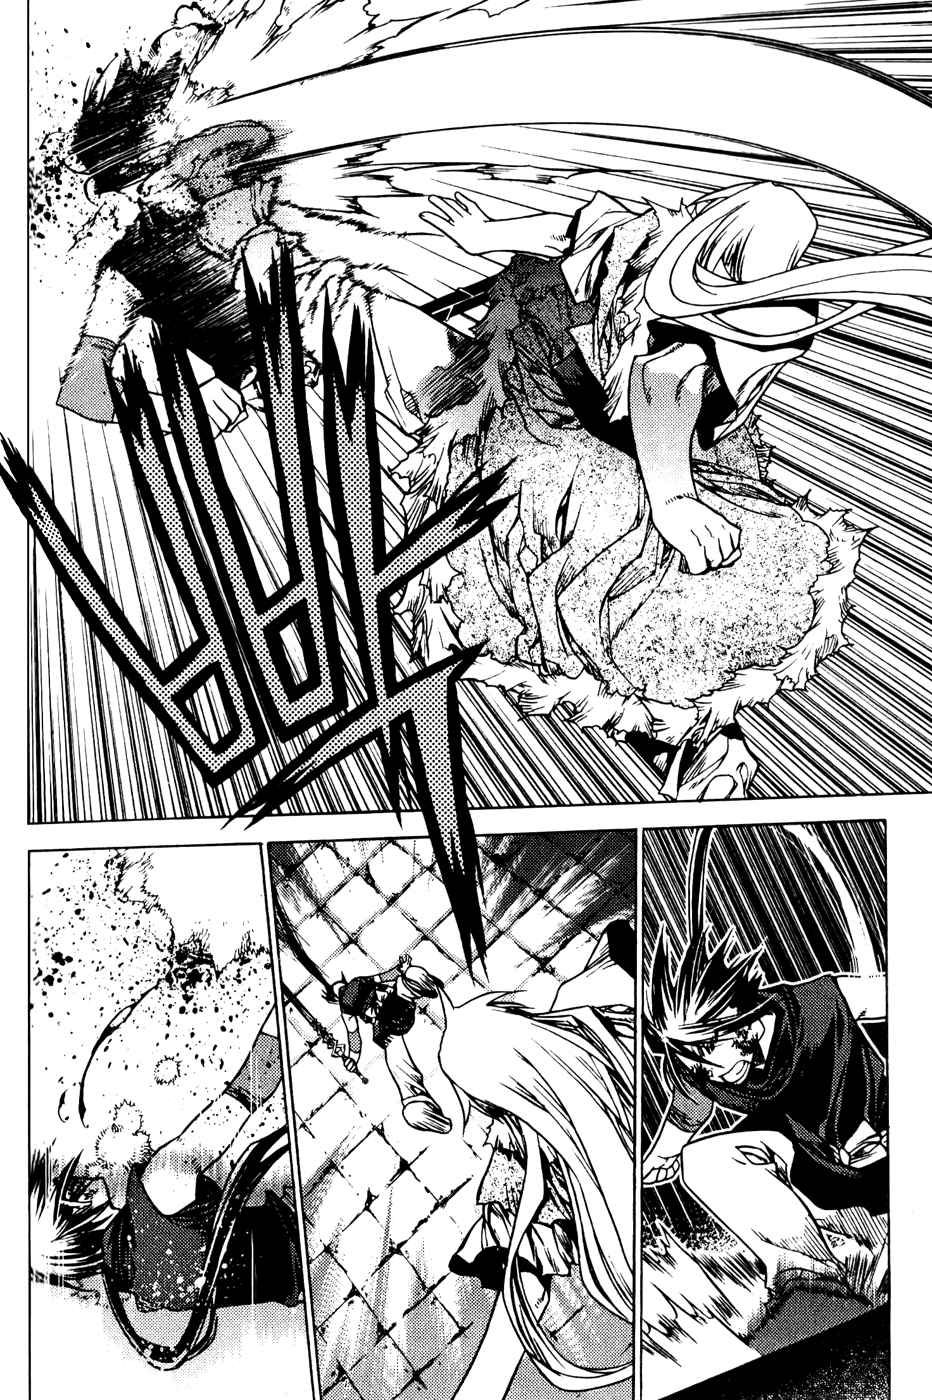 Chronicles of the Cursed Sword Vol. 19 Ch. 76 Enter Jukwol